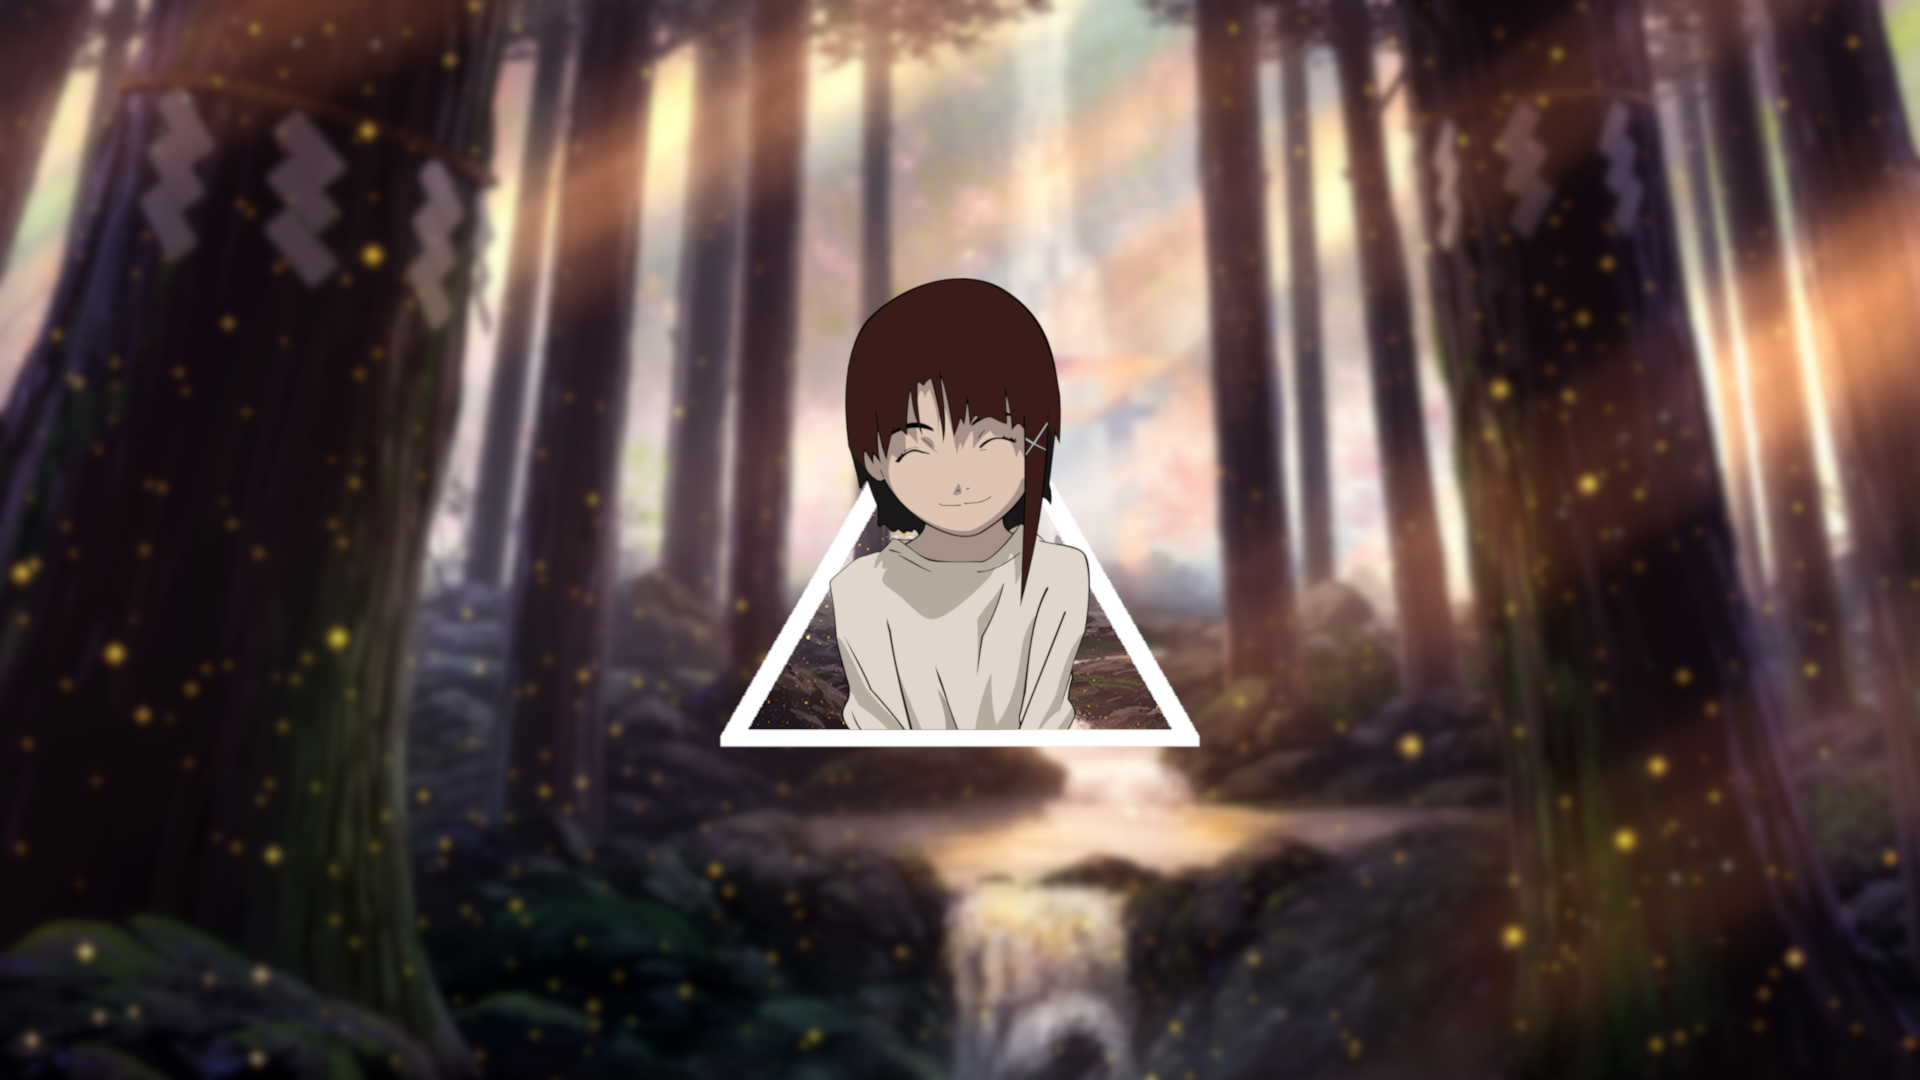 Anime 1920x1080 anime Serial Experiments Lain triangle picture-in-picture Lain Iwakura